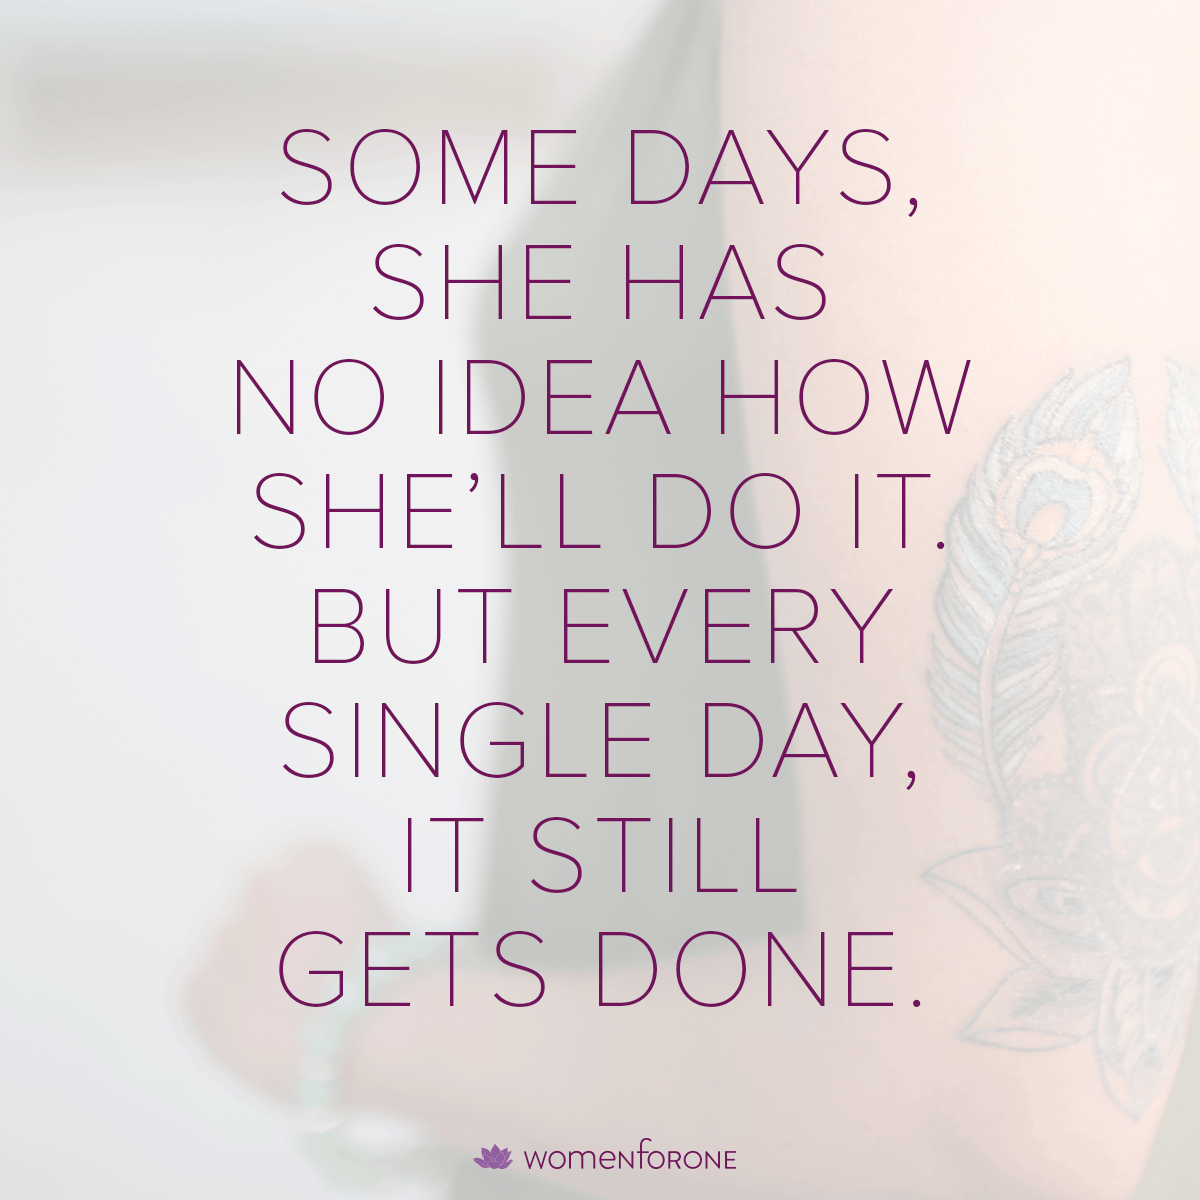 Some days, she has no idea how she’ll do it. But every single day, it still gets done.